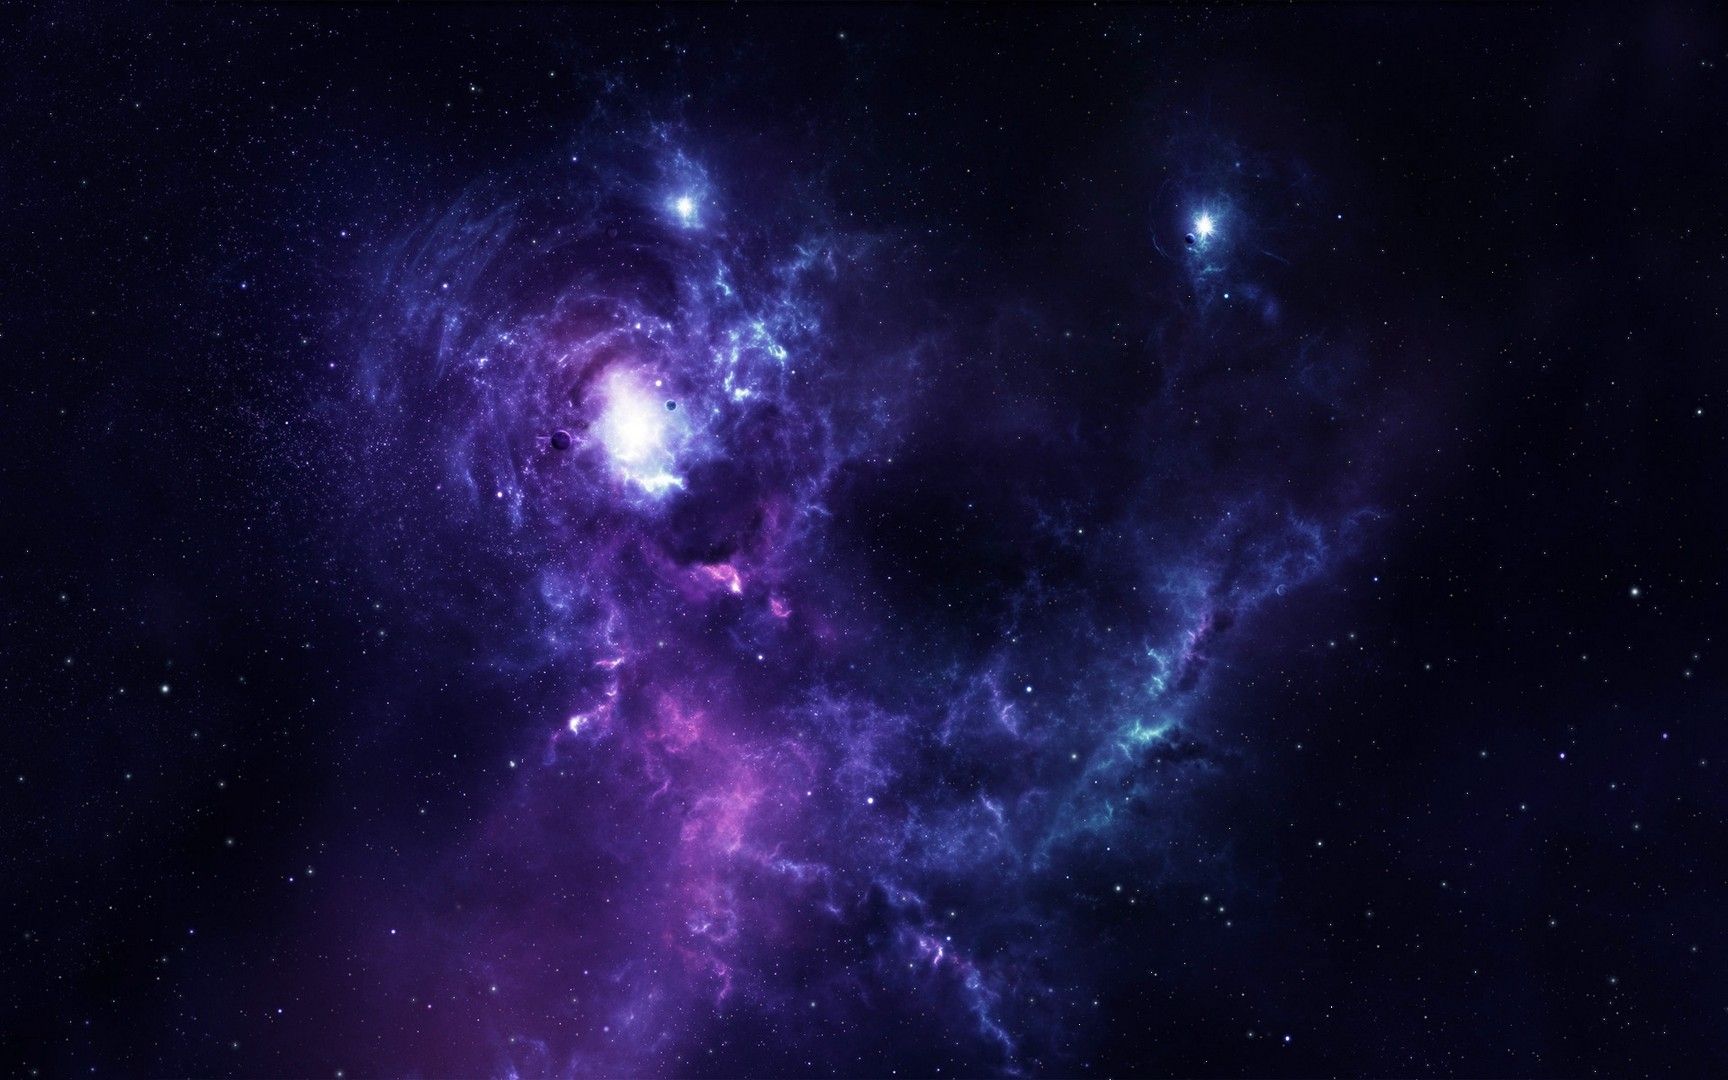 Space Stars Wallpaper For Laptop Live Wallpaper HD. Nebula wallpaper, Nebula, Star wallpaper